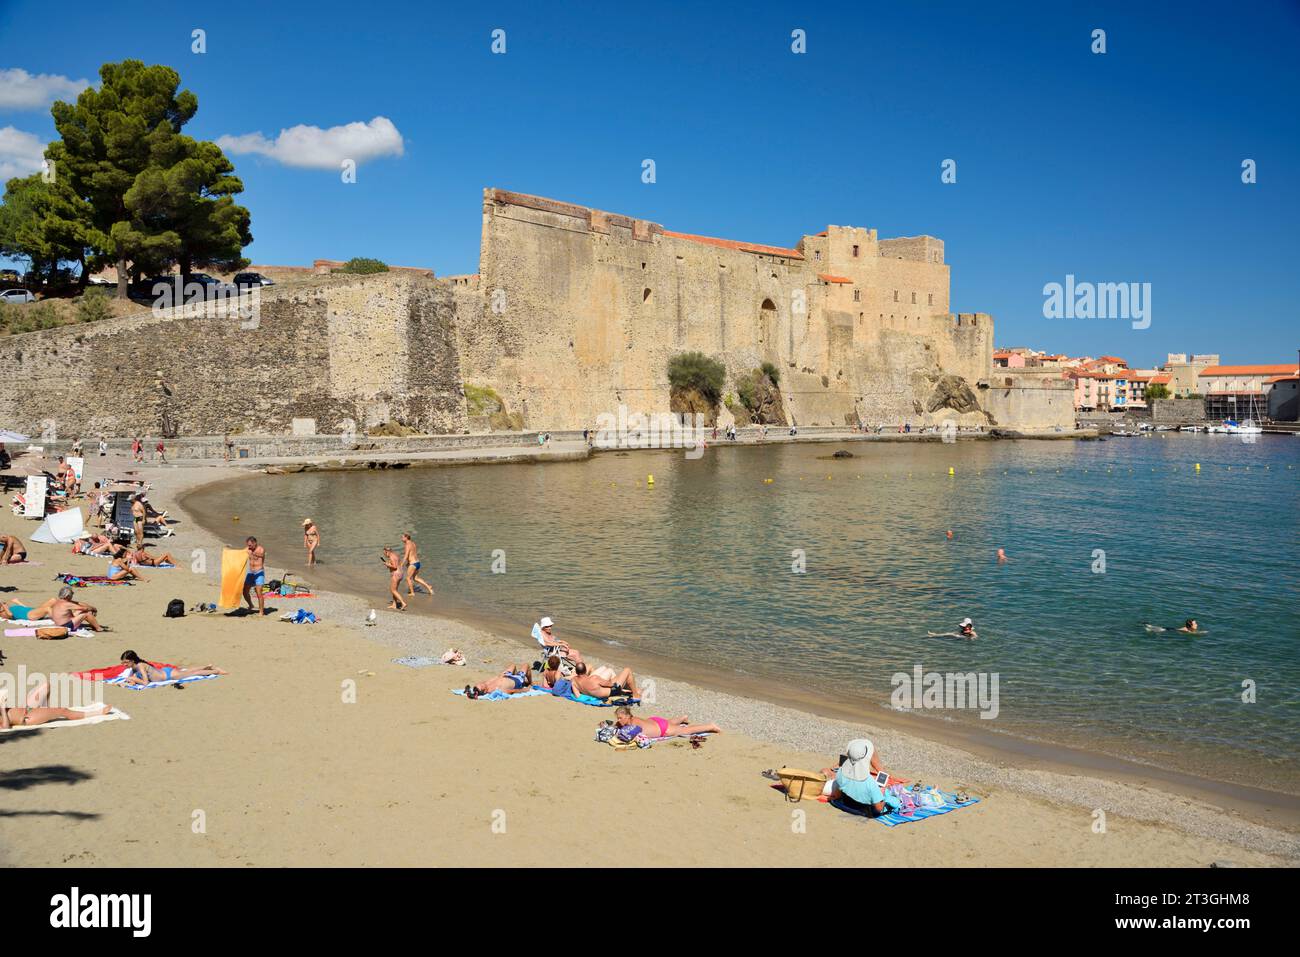 France, Pyrenees Orientales, Cote Vermeille, Collioure, Port d'Avall beach and Royal Castle defensive wall Stock Photo